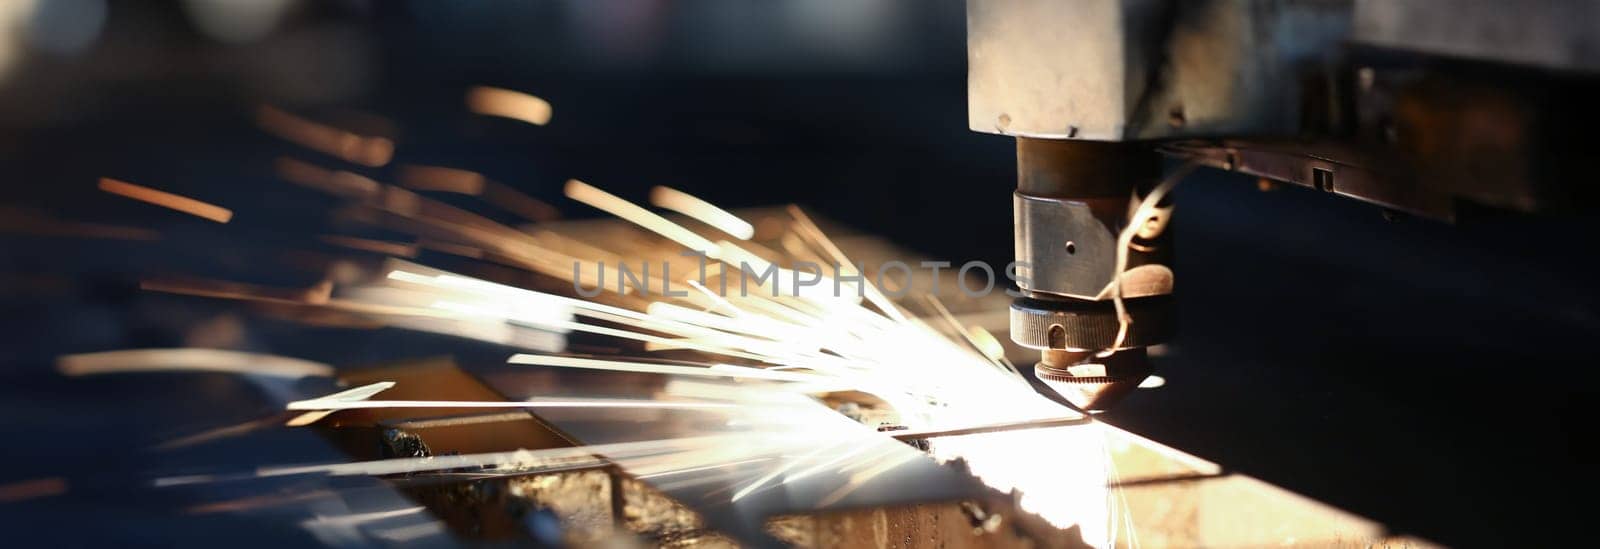 Sparks fly out machine head for metal processing by kuprevich